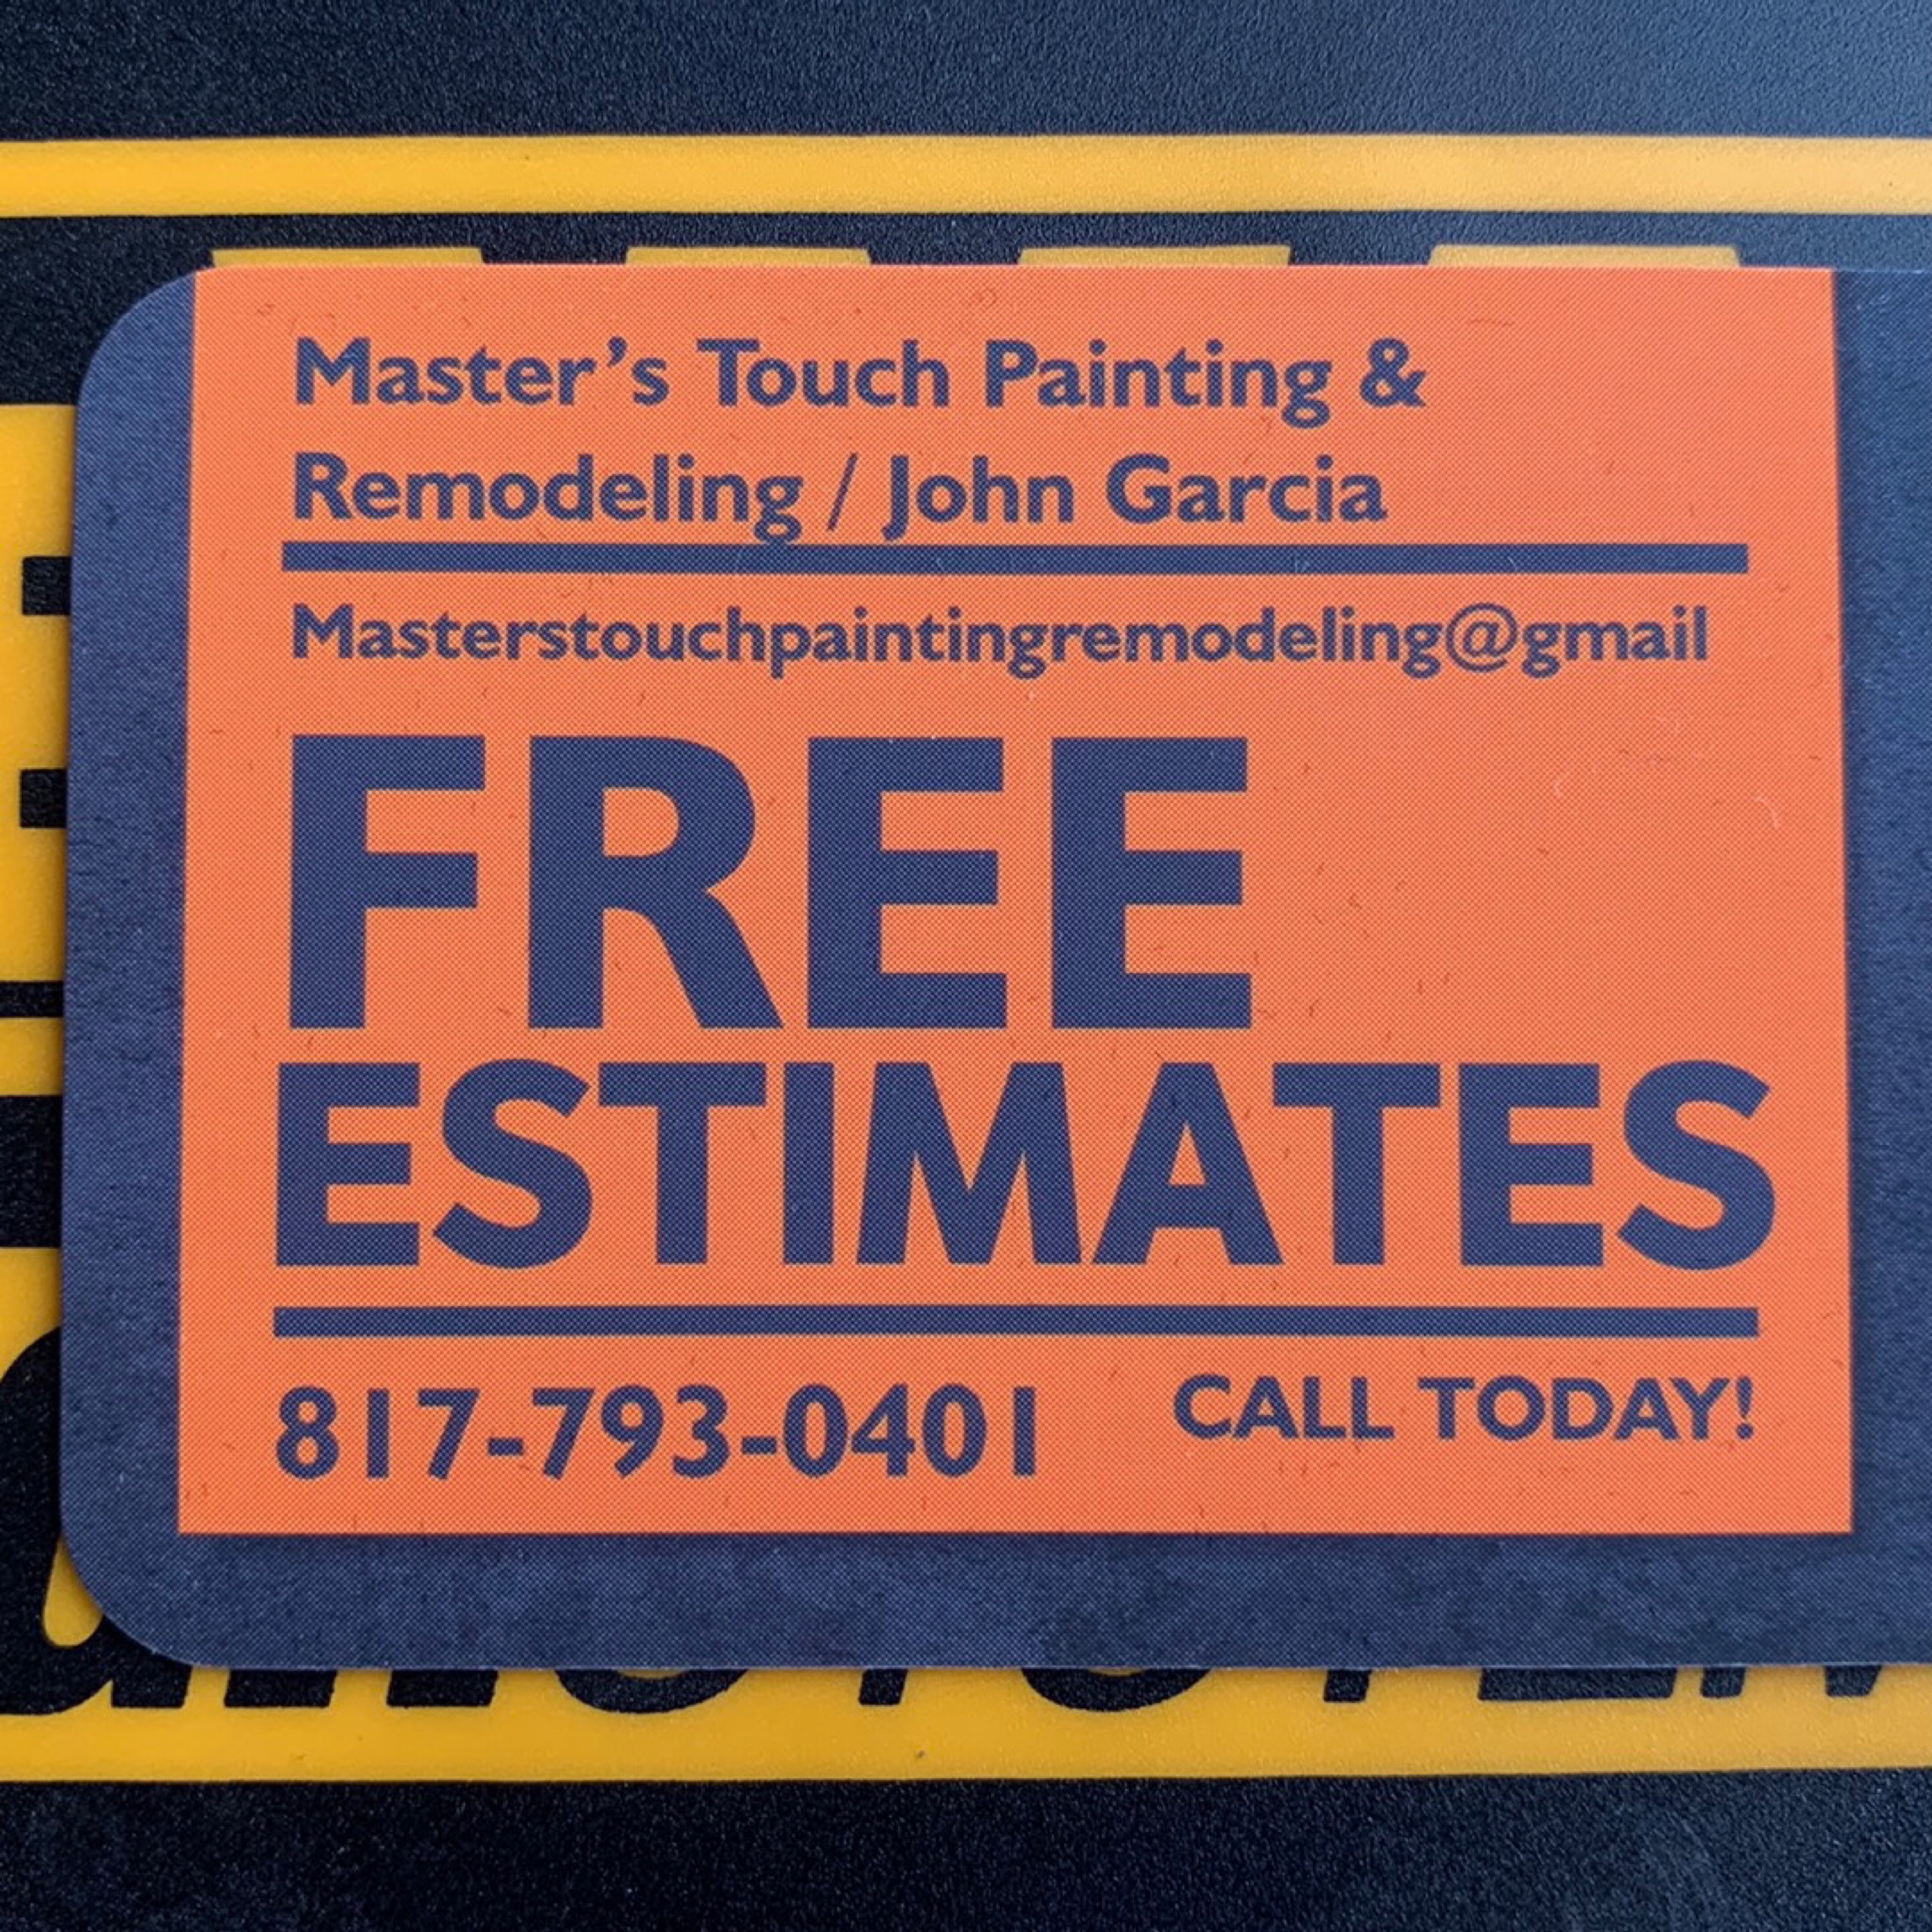 Master's Touch Painting & Remodeling Logo